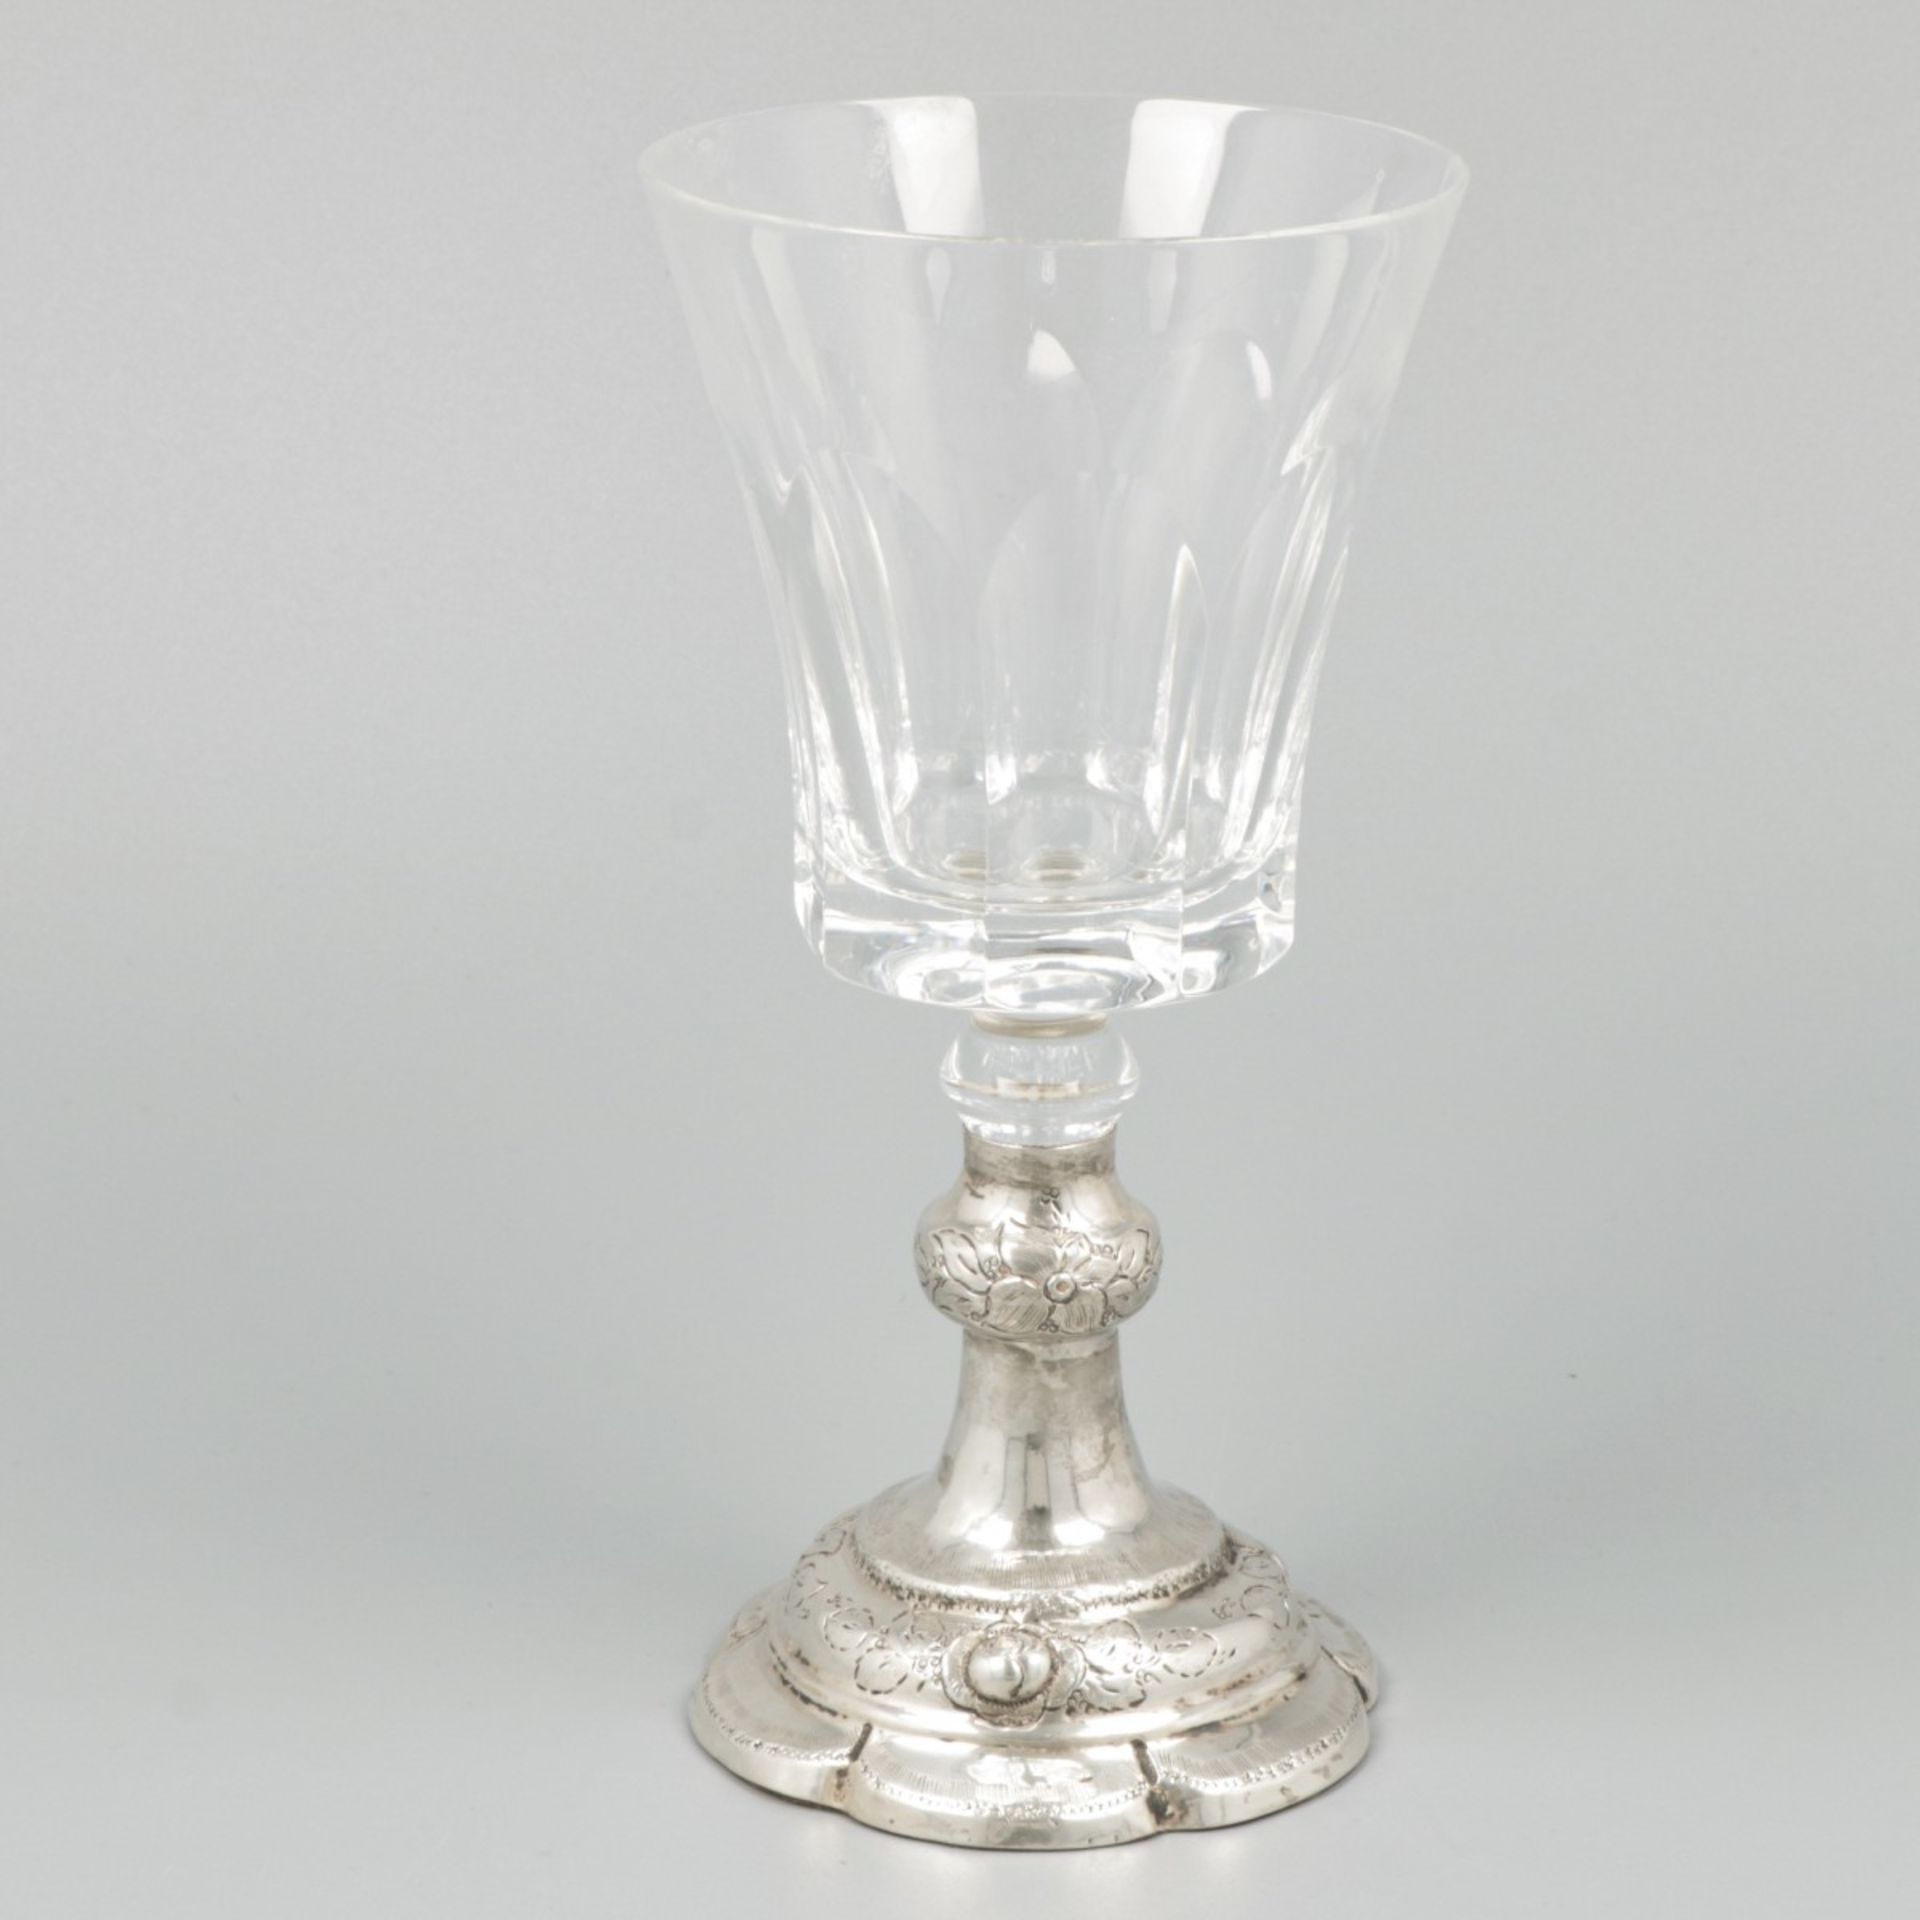 2-piece set of wine glasses silver. - Image 2 of 6